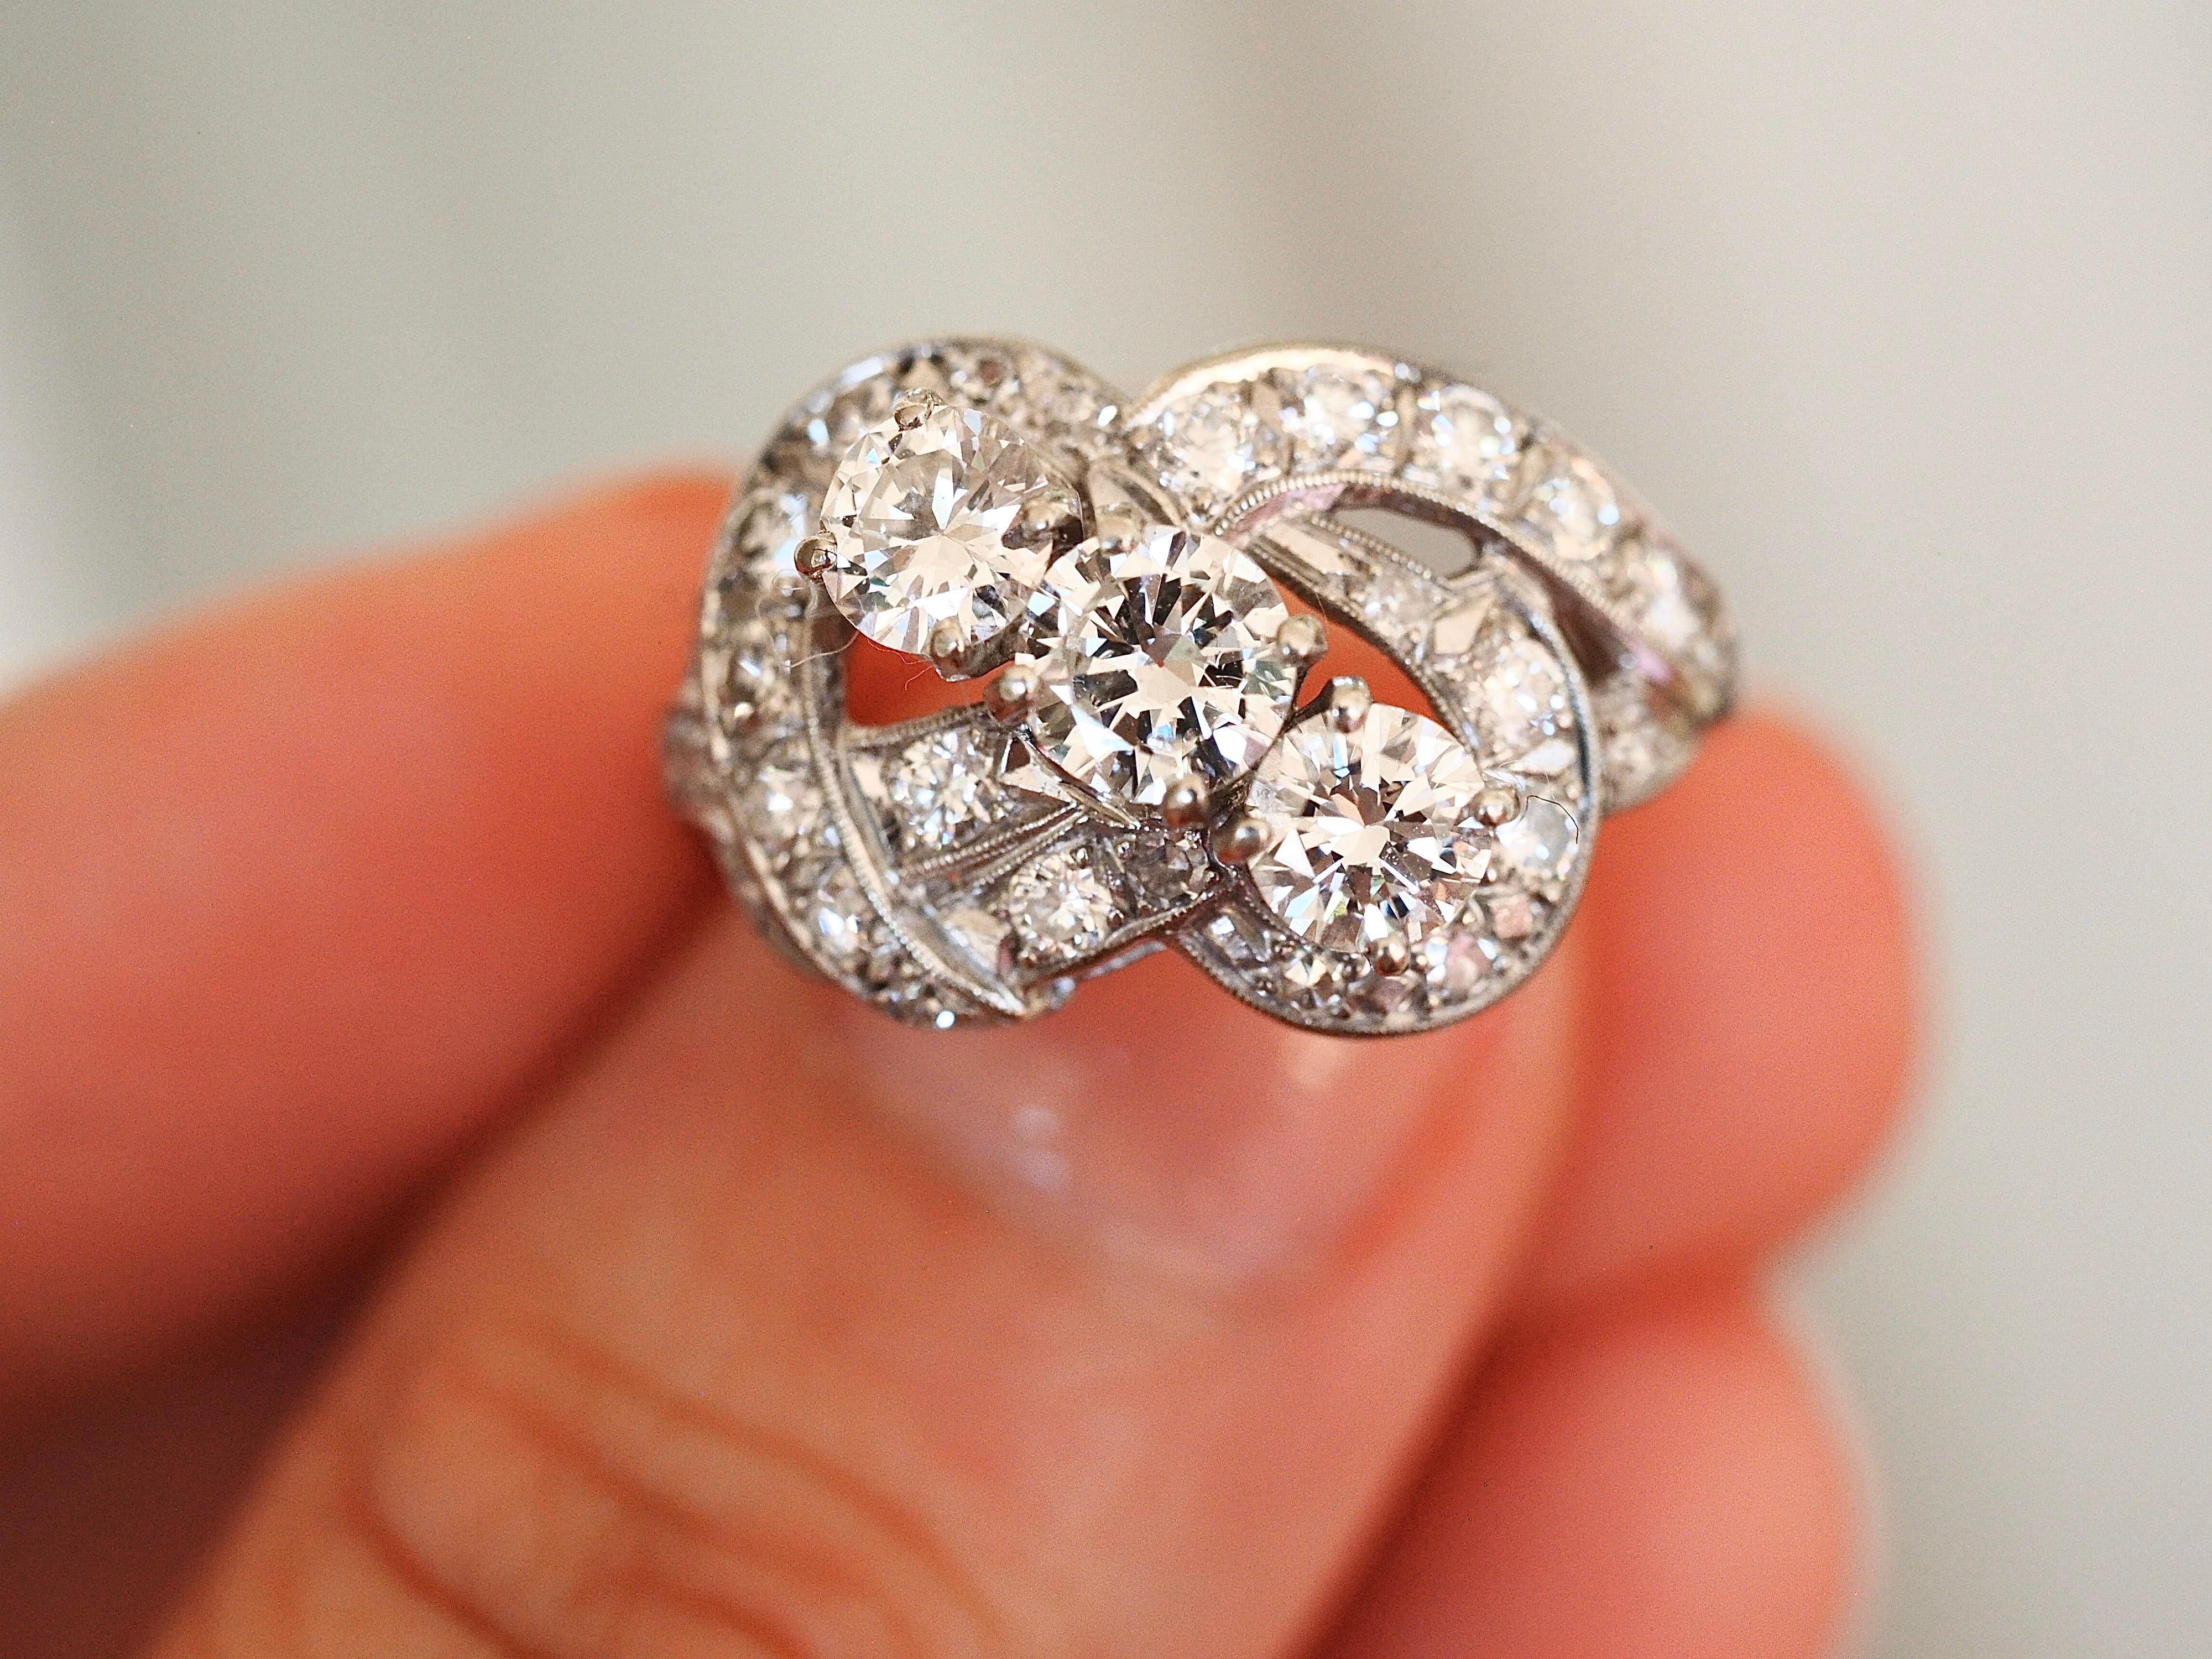 Vintage Art Deco 14 Karat White Gold Diamond Cocktail Ring, circa 1930s In Good Condition For Sale In Addison, TX